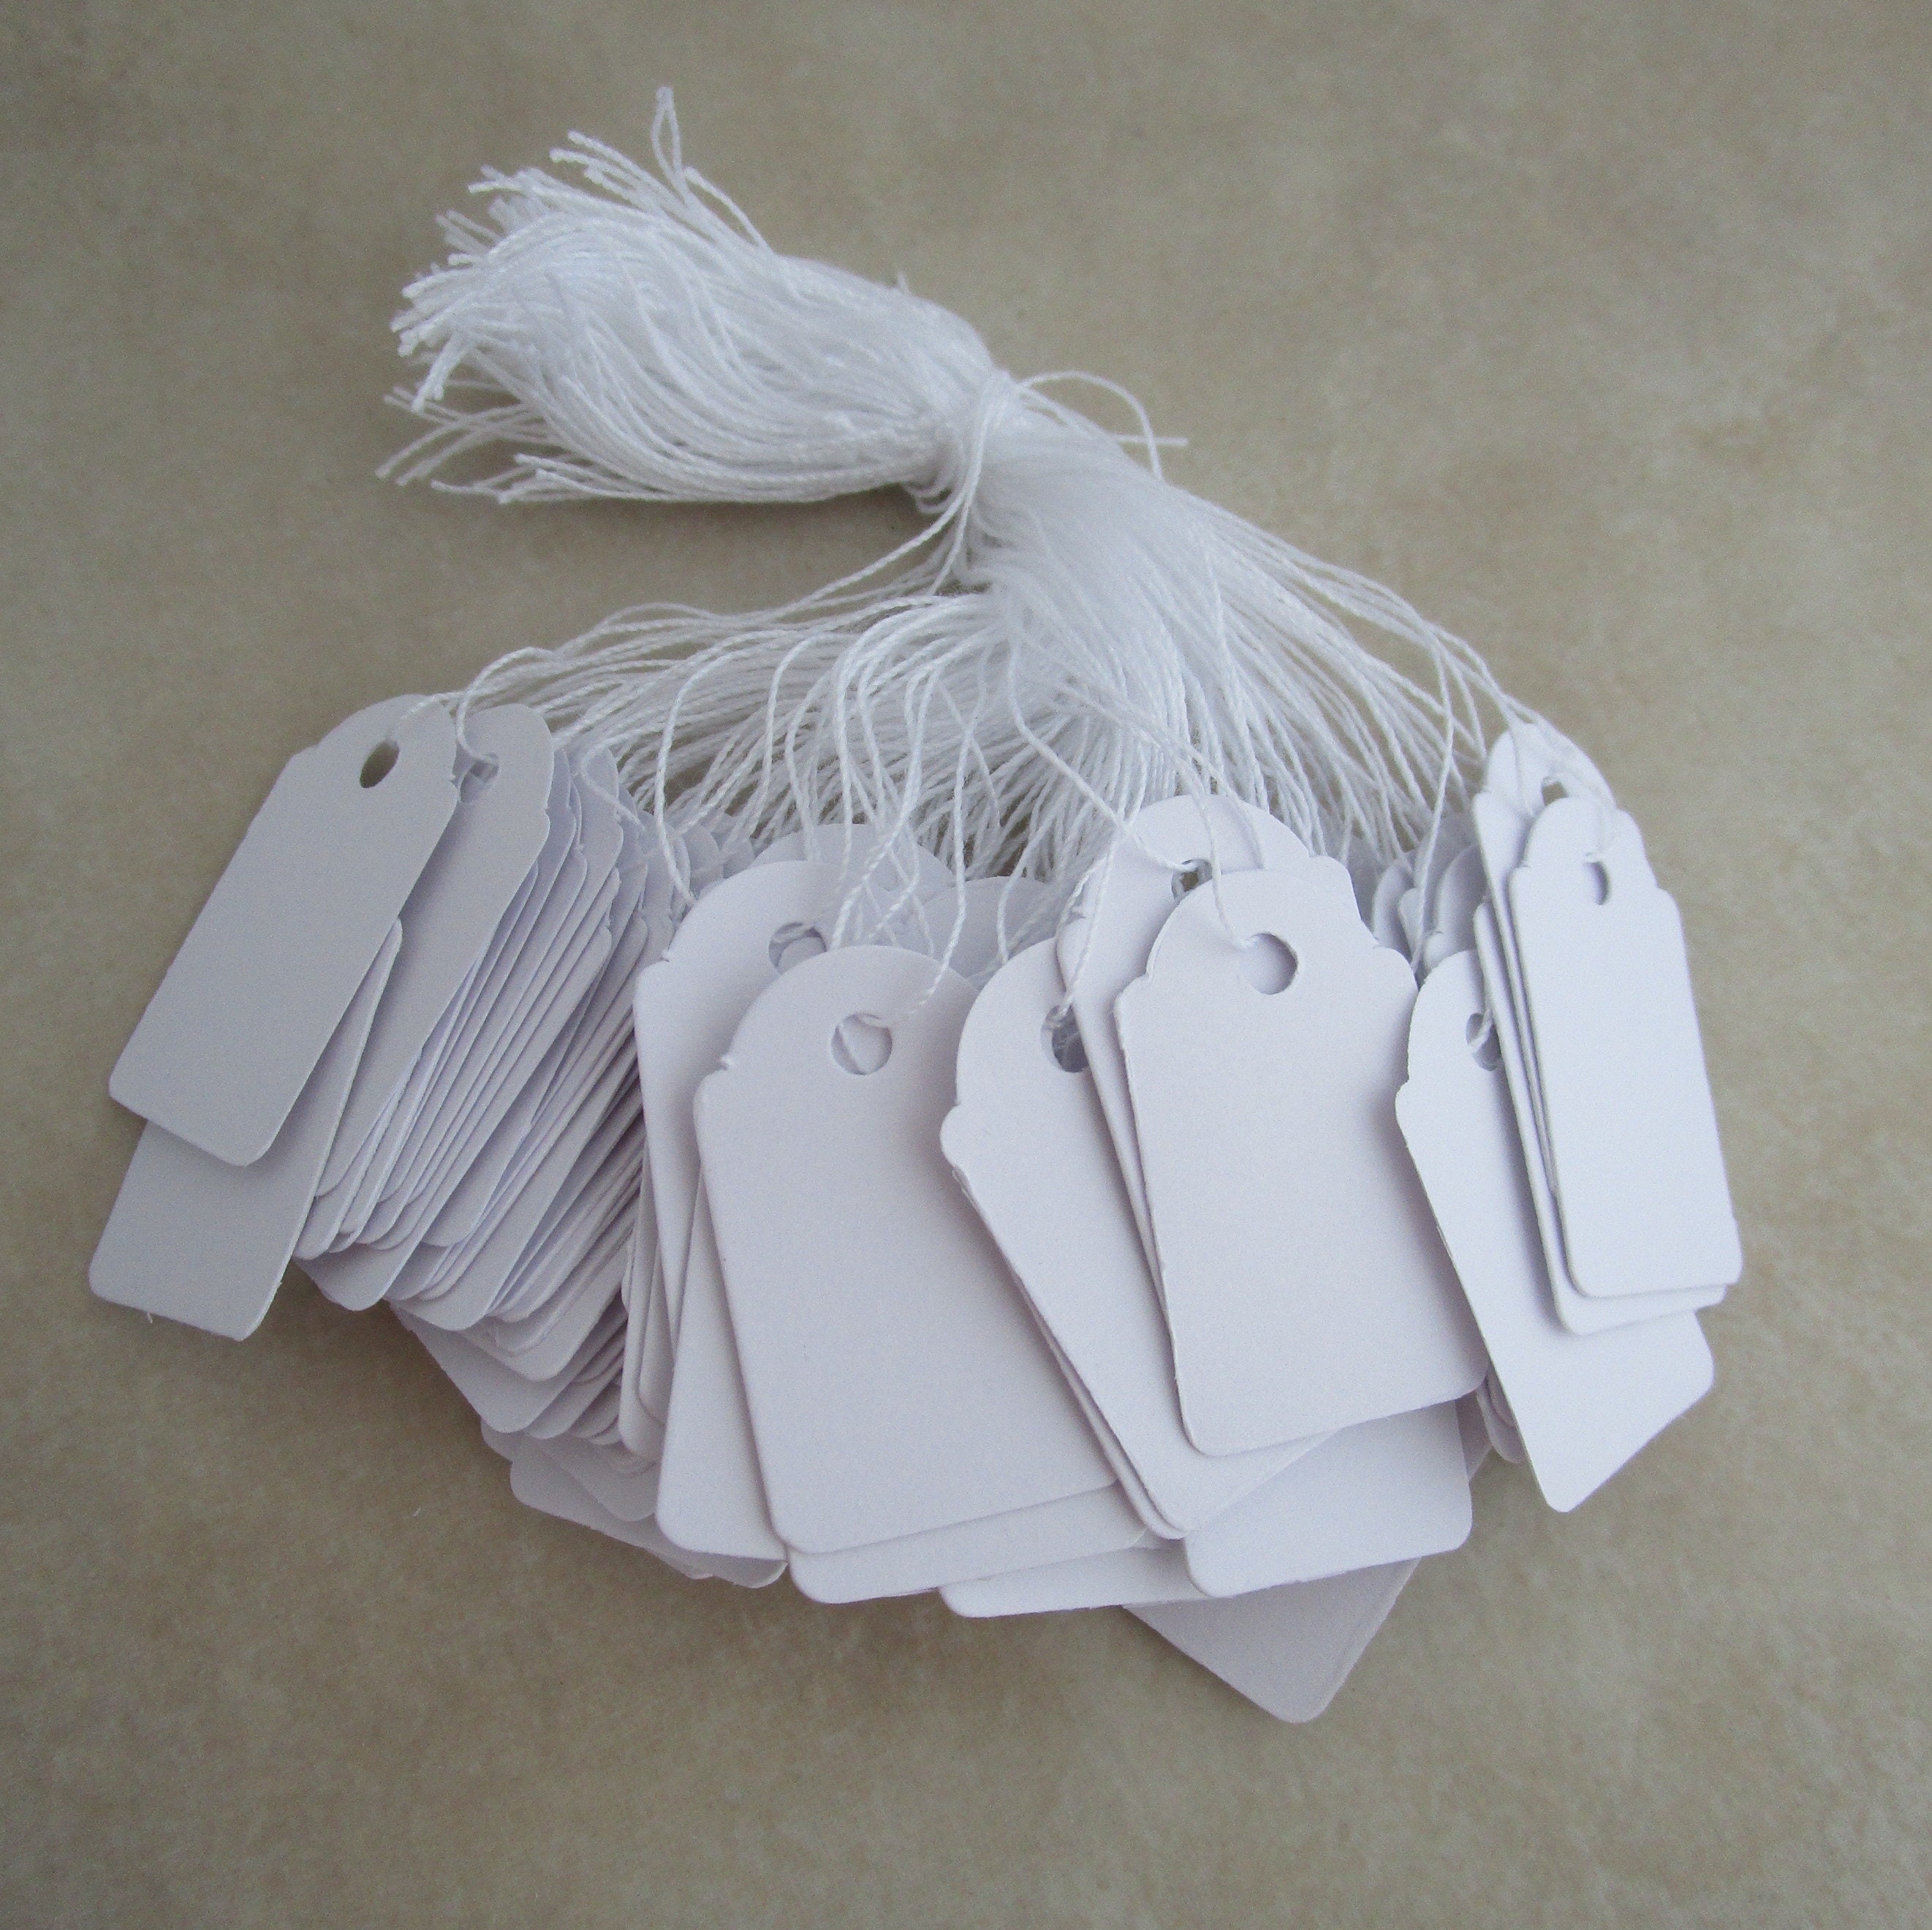 100 pcs Silver Plastic Price Tags, Jewelry Price Tags with String - 100 Pcs